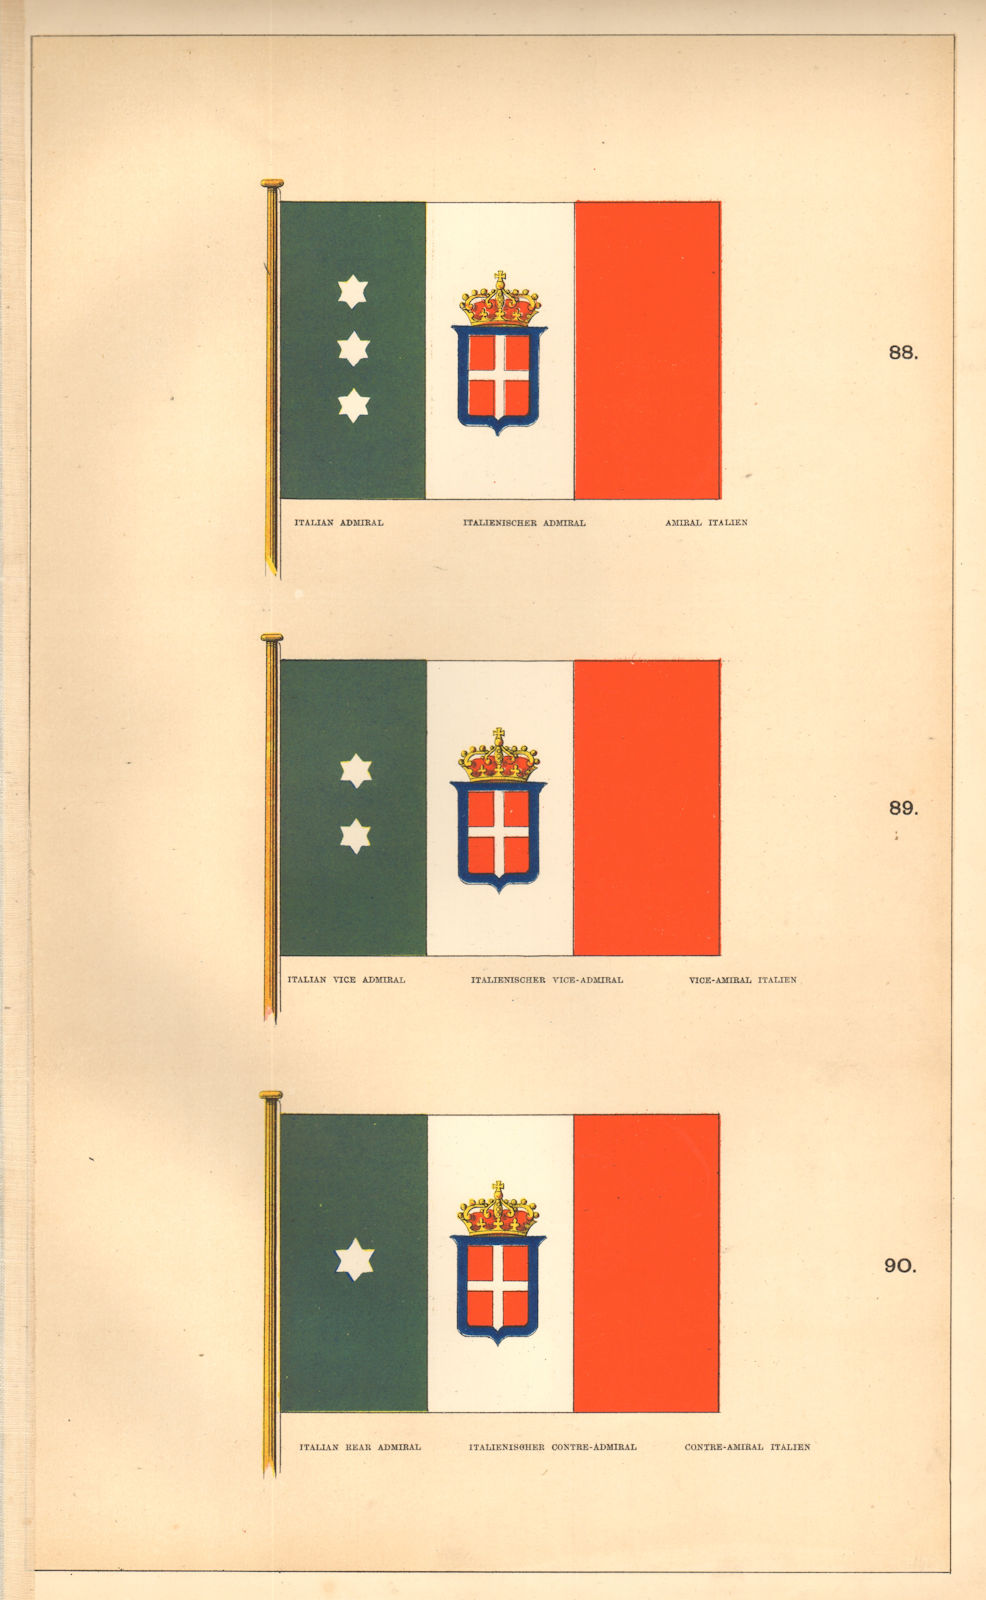 Associate Product ITALIAN ROYAL NAVAL FLAGS. Full, Vice- & Rear-Admiral. Italy. HOUNSELL 1873